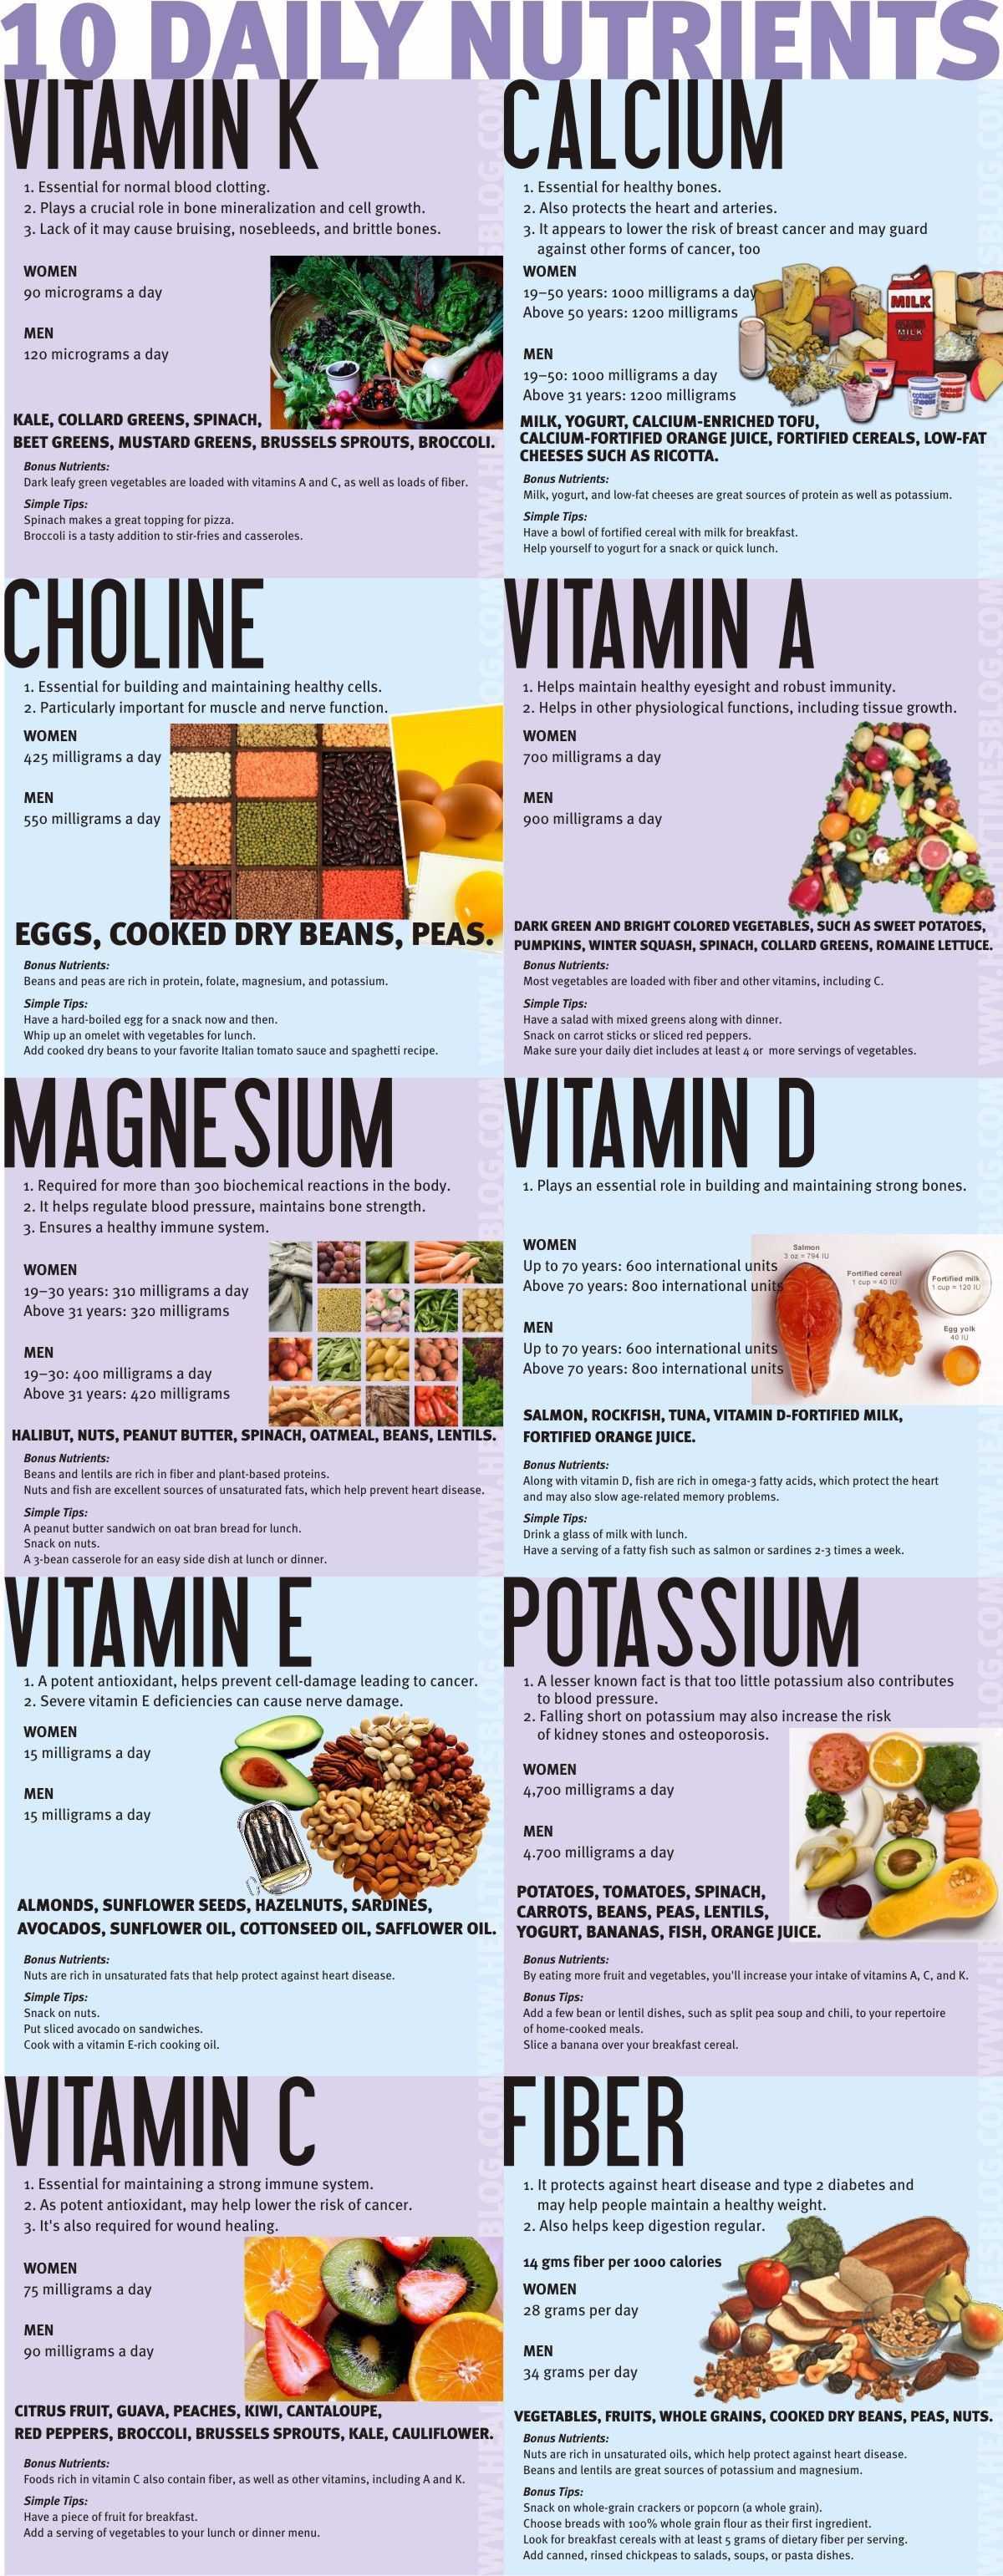 10 Daily Nutrients